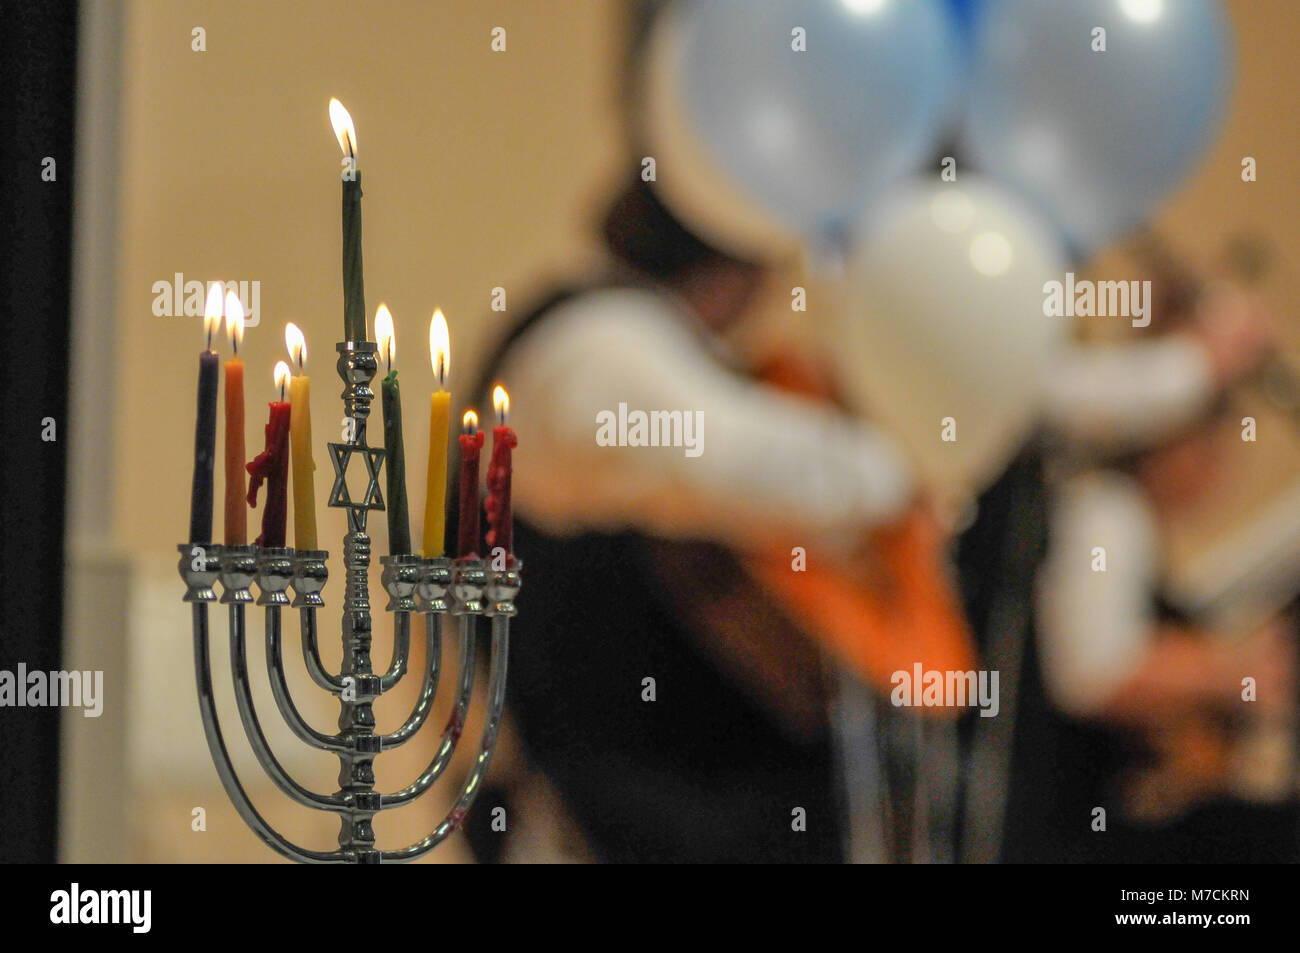 A Menorah  with eight candles burns at a Jewish holiday concert.  Candles in foreground and Jewish band blurred out in the background. Stock Photo